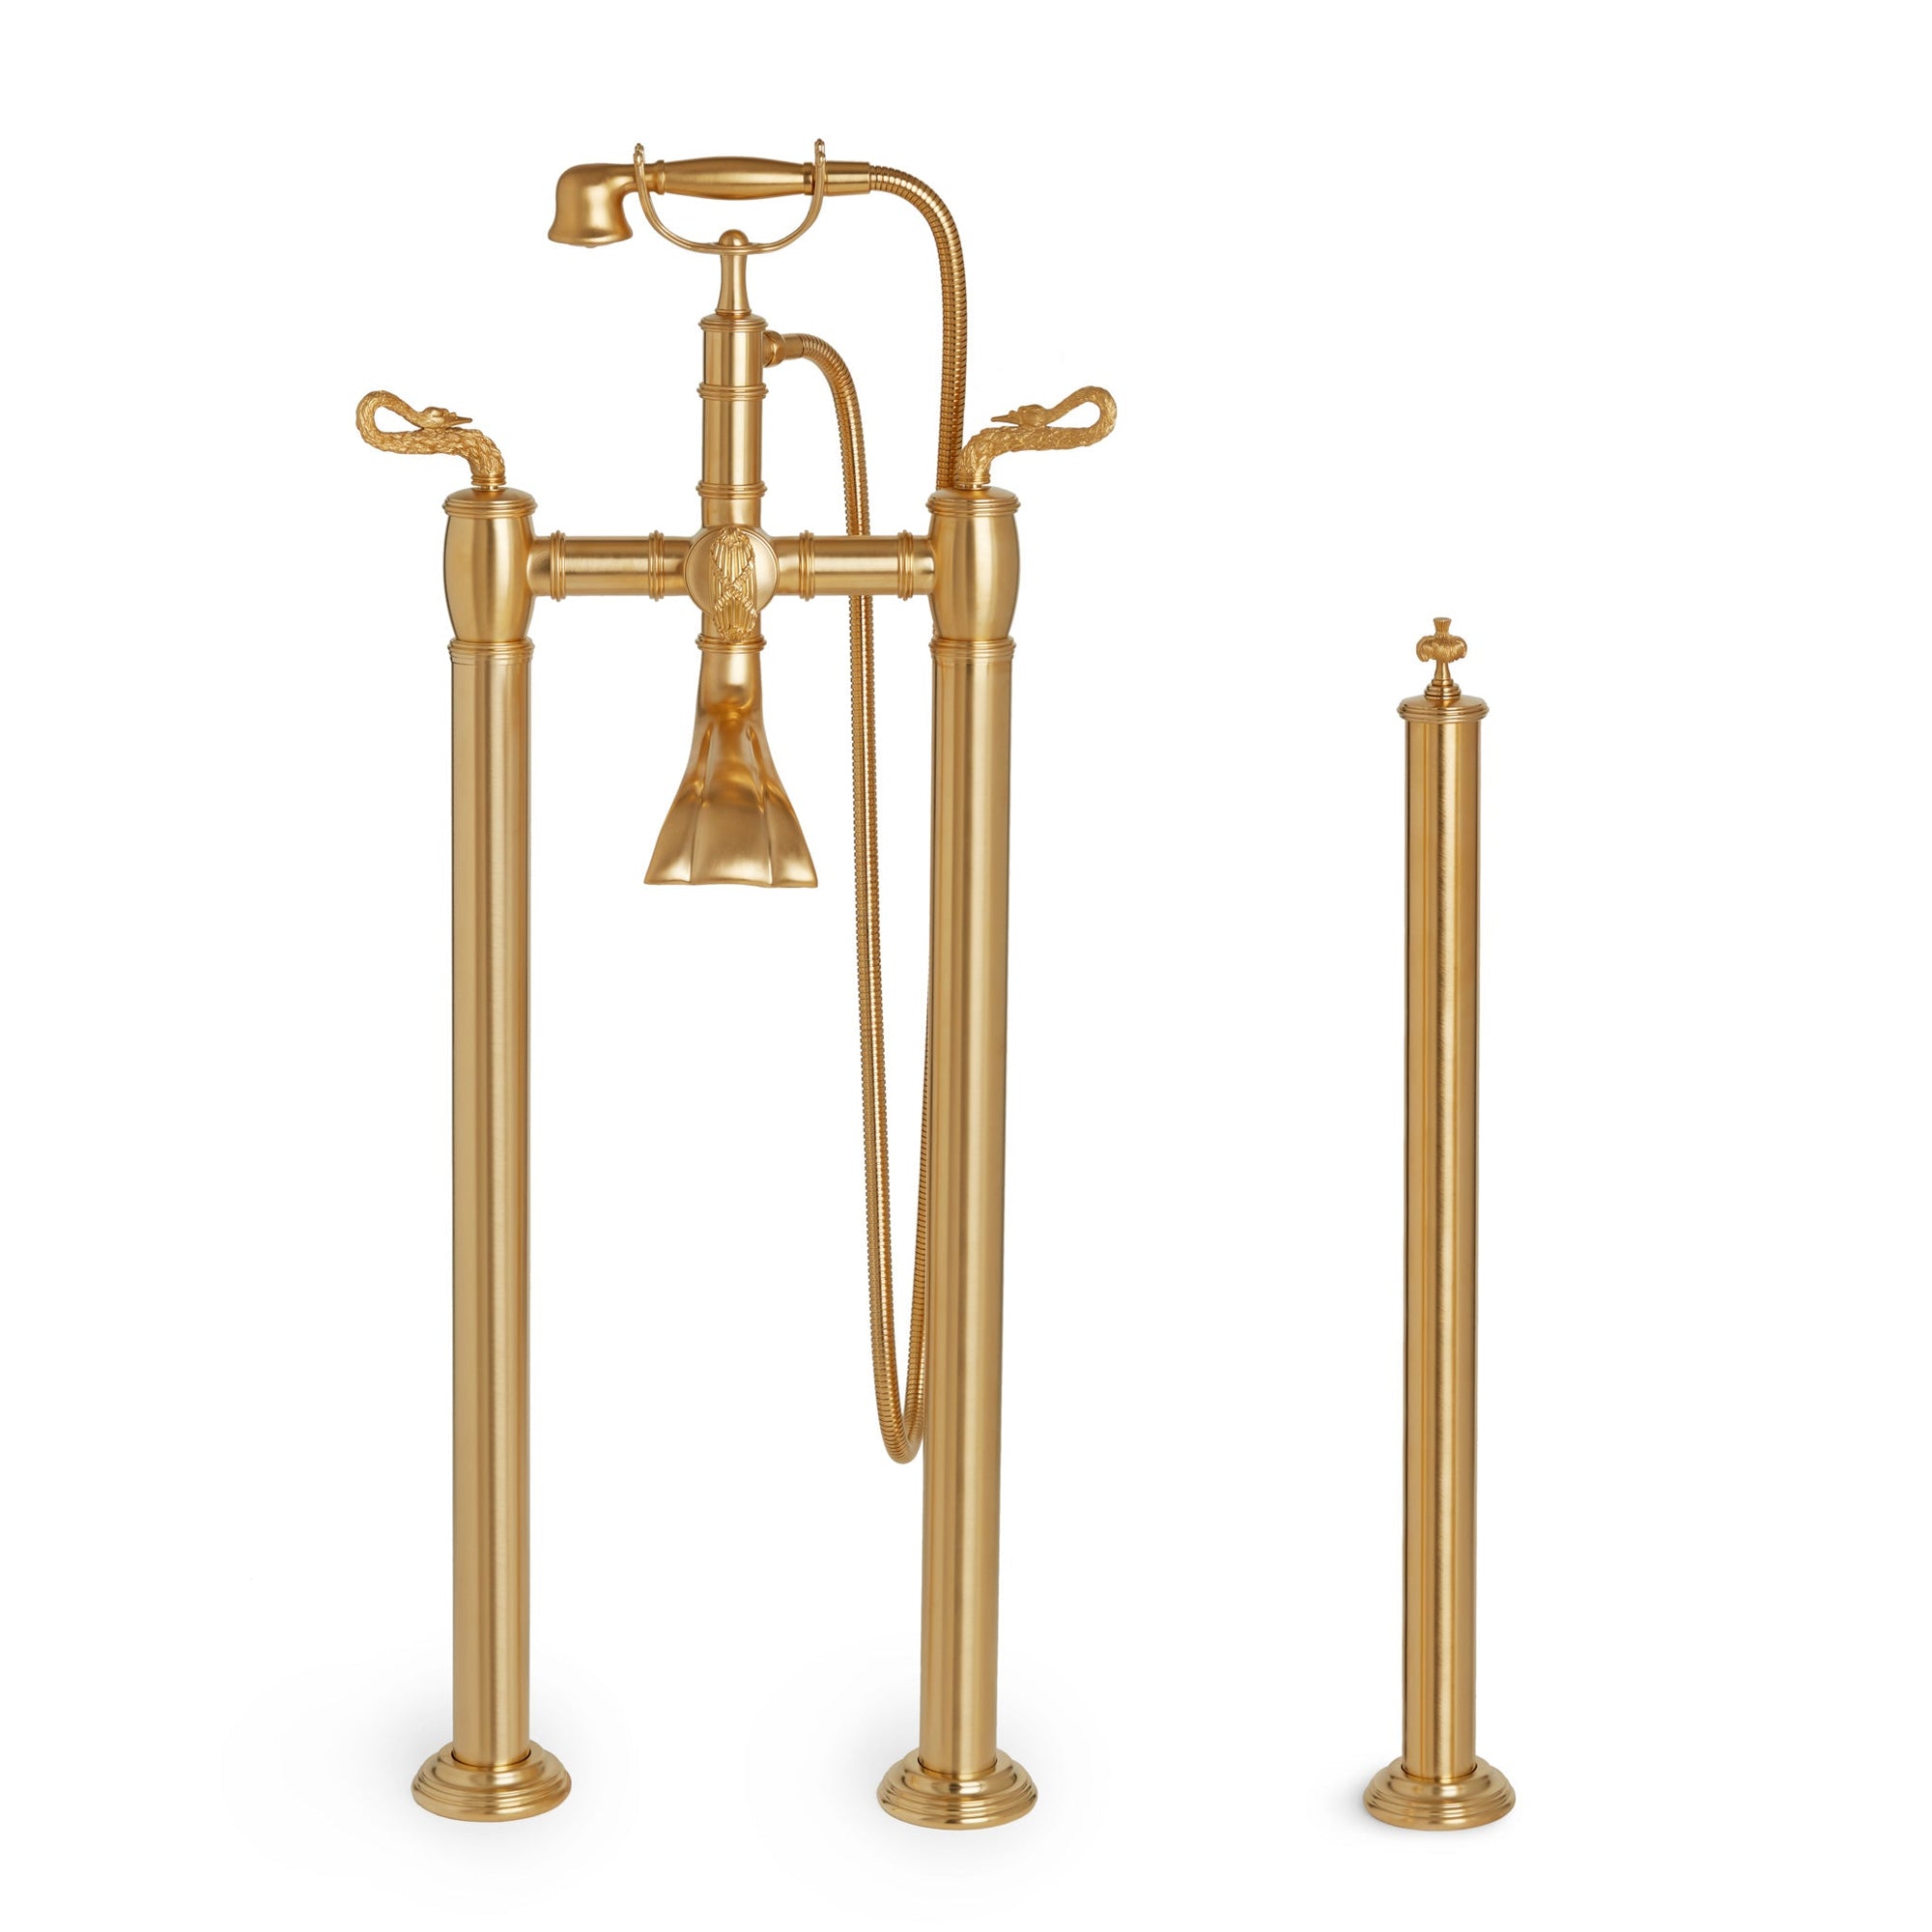 0915XT-S-01-GP Sherle Wagner International Swan Lever Exposed Tub Set in Gold Plate metal finish